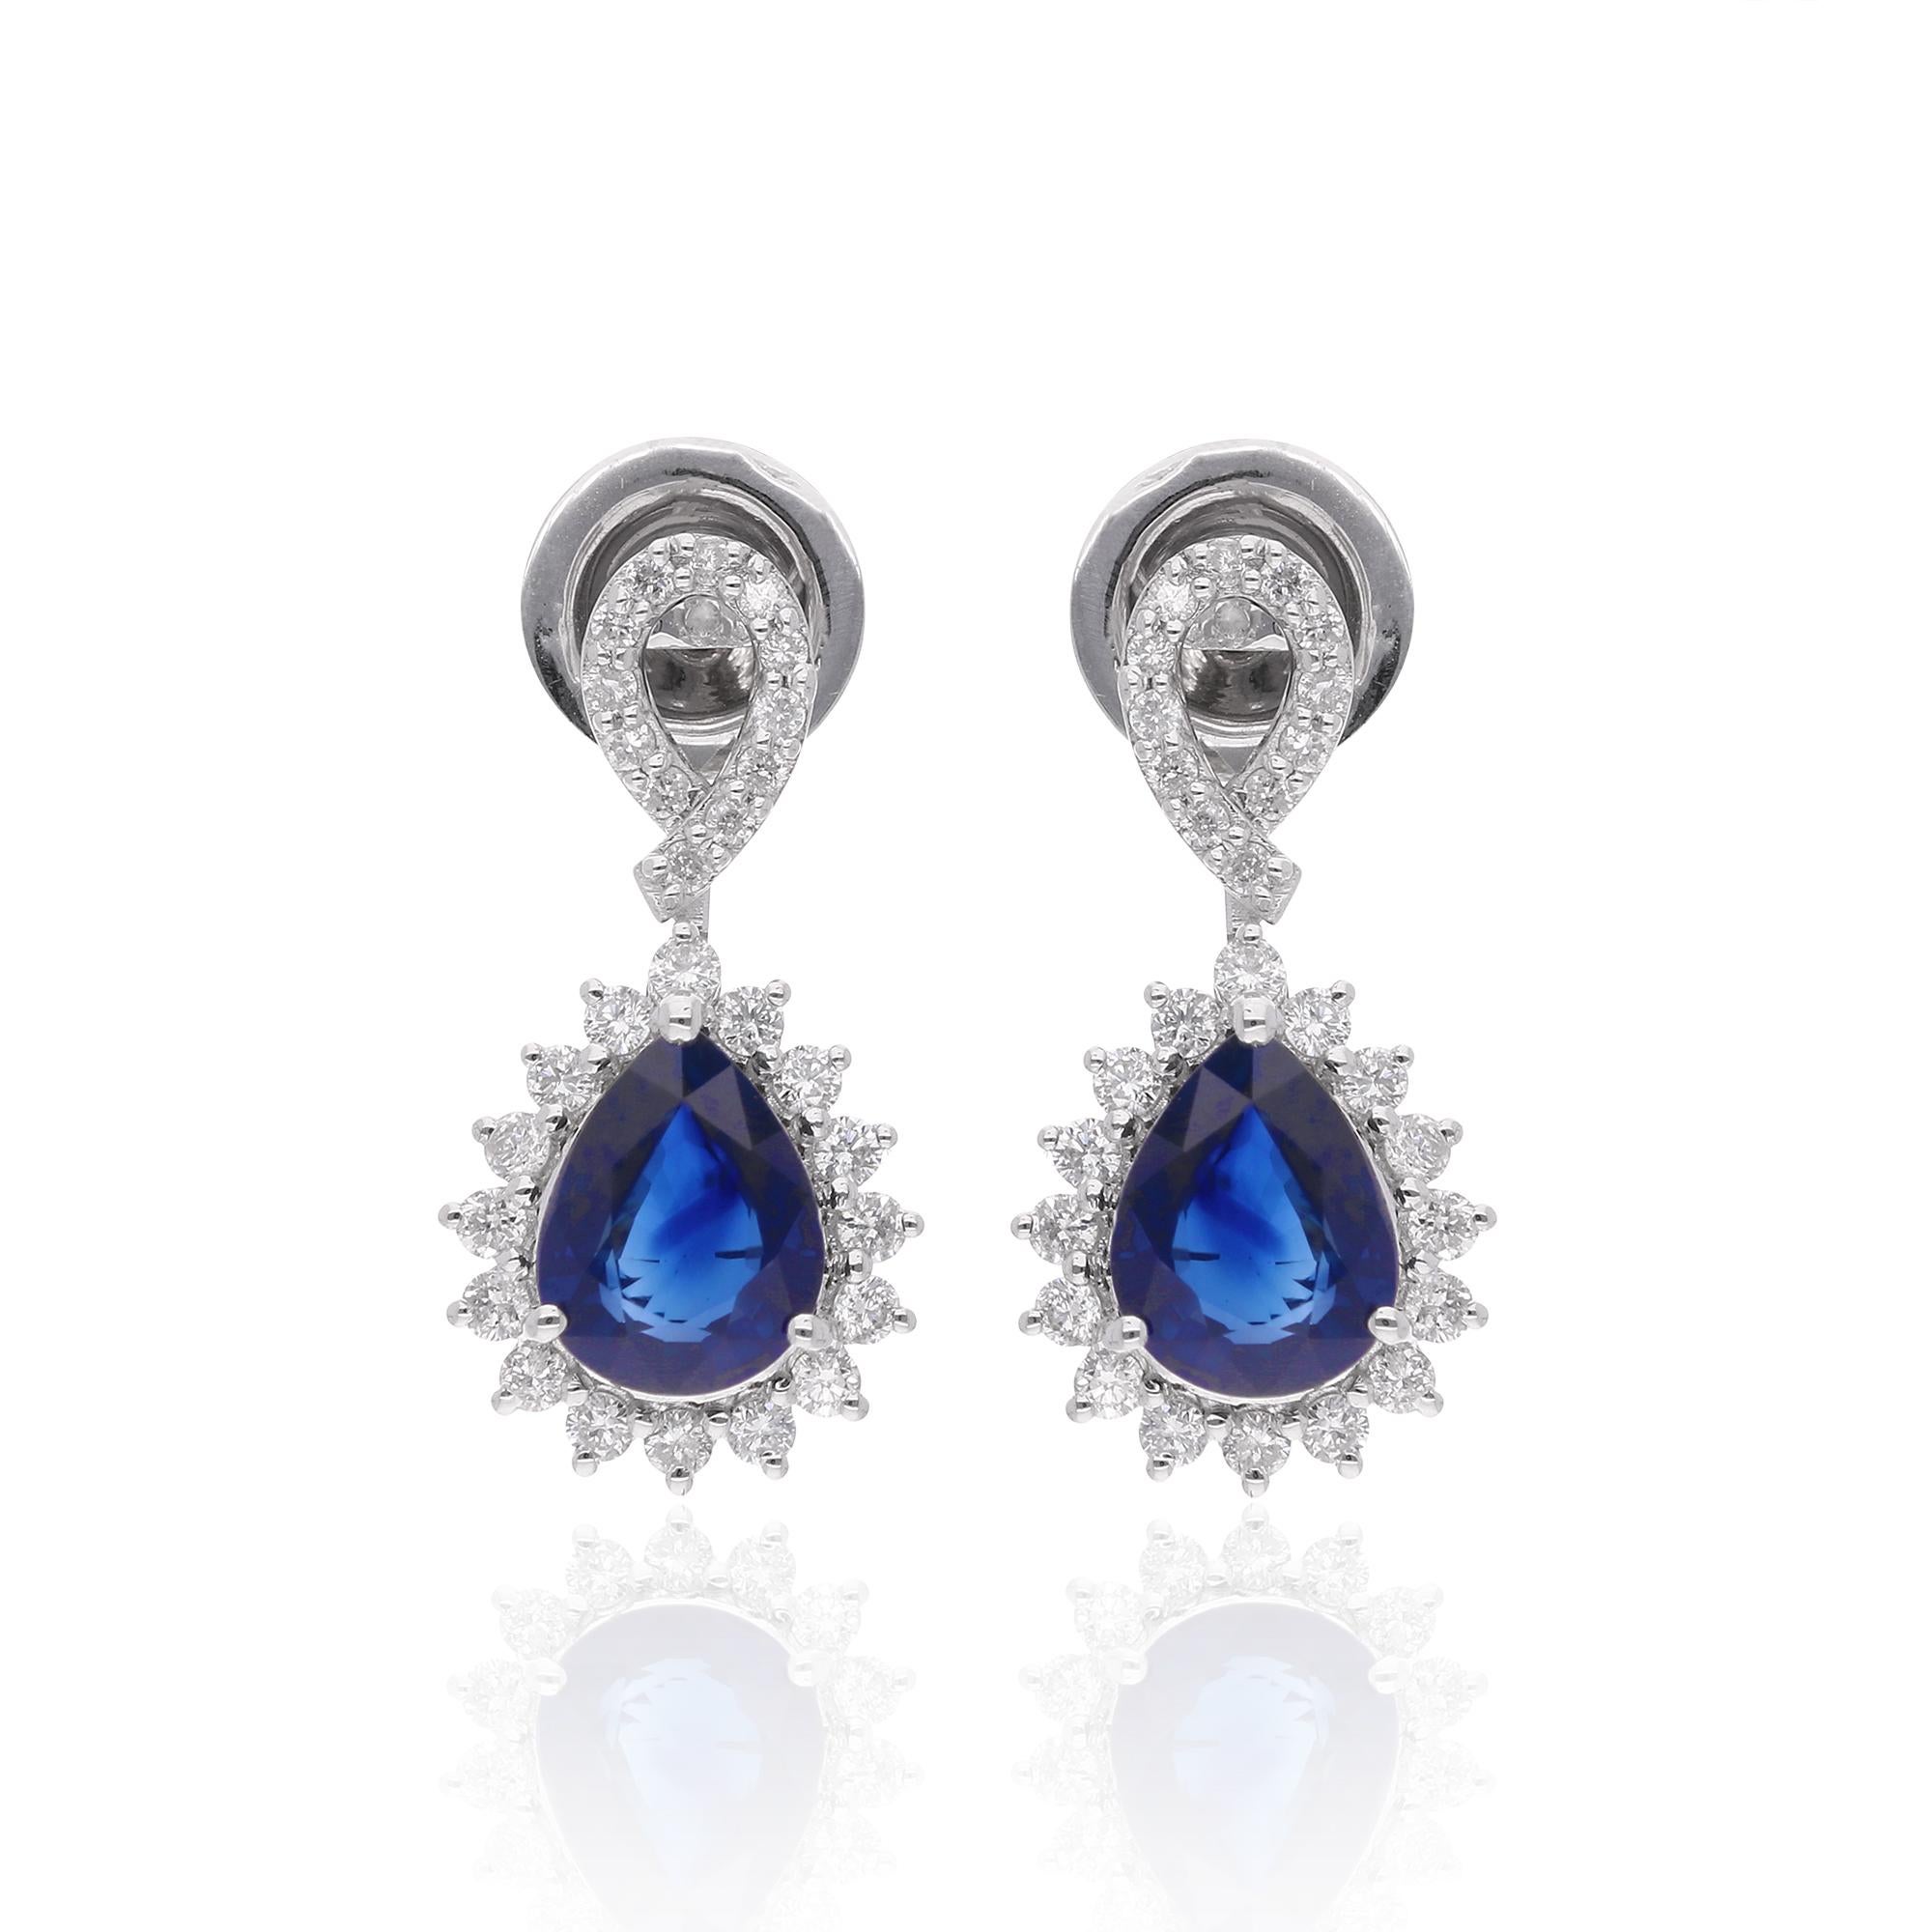 Crafted from 18k solid white gold, each earring features a stunning Sapphire encircled by a halo of brilliant, sparkling diamonds. These earrings are available in 10k/14k/18k, Rose Gold/Yellow Gold/White Gold.

These are perfect Gift for Mom,